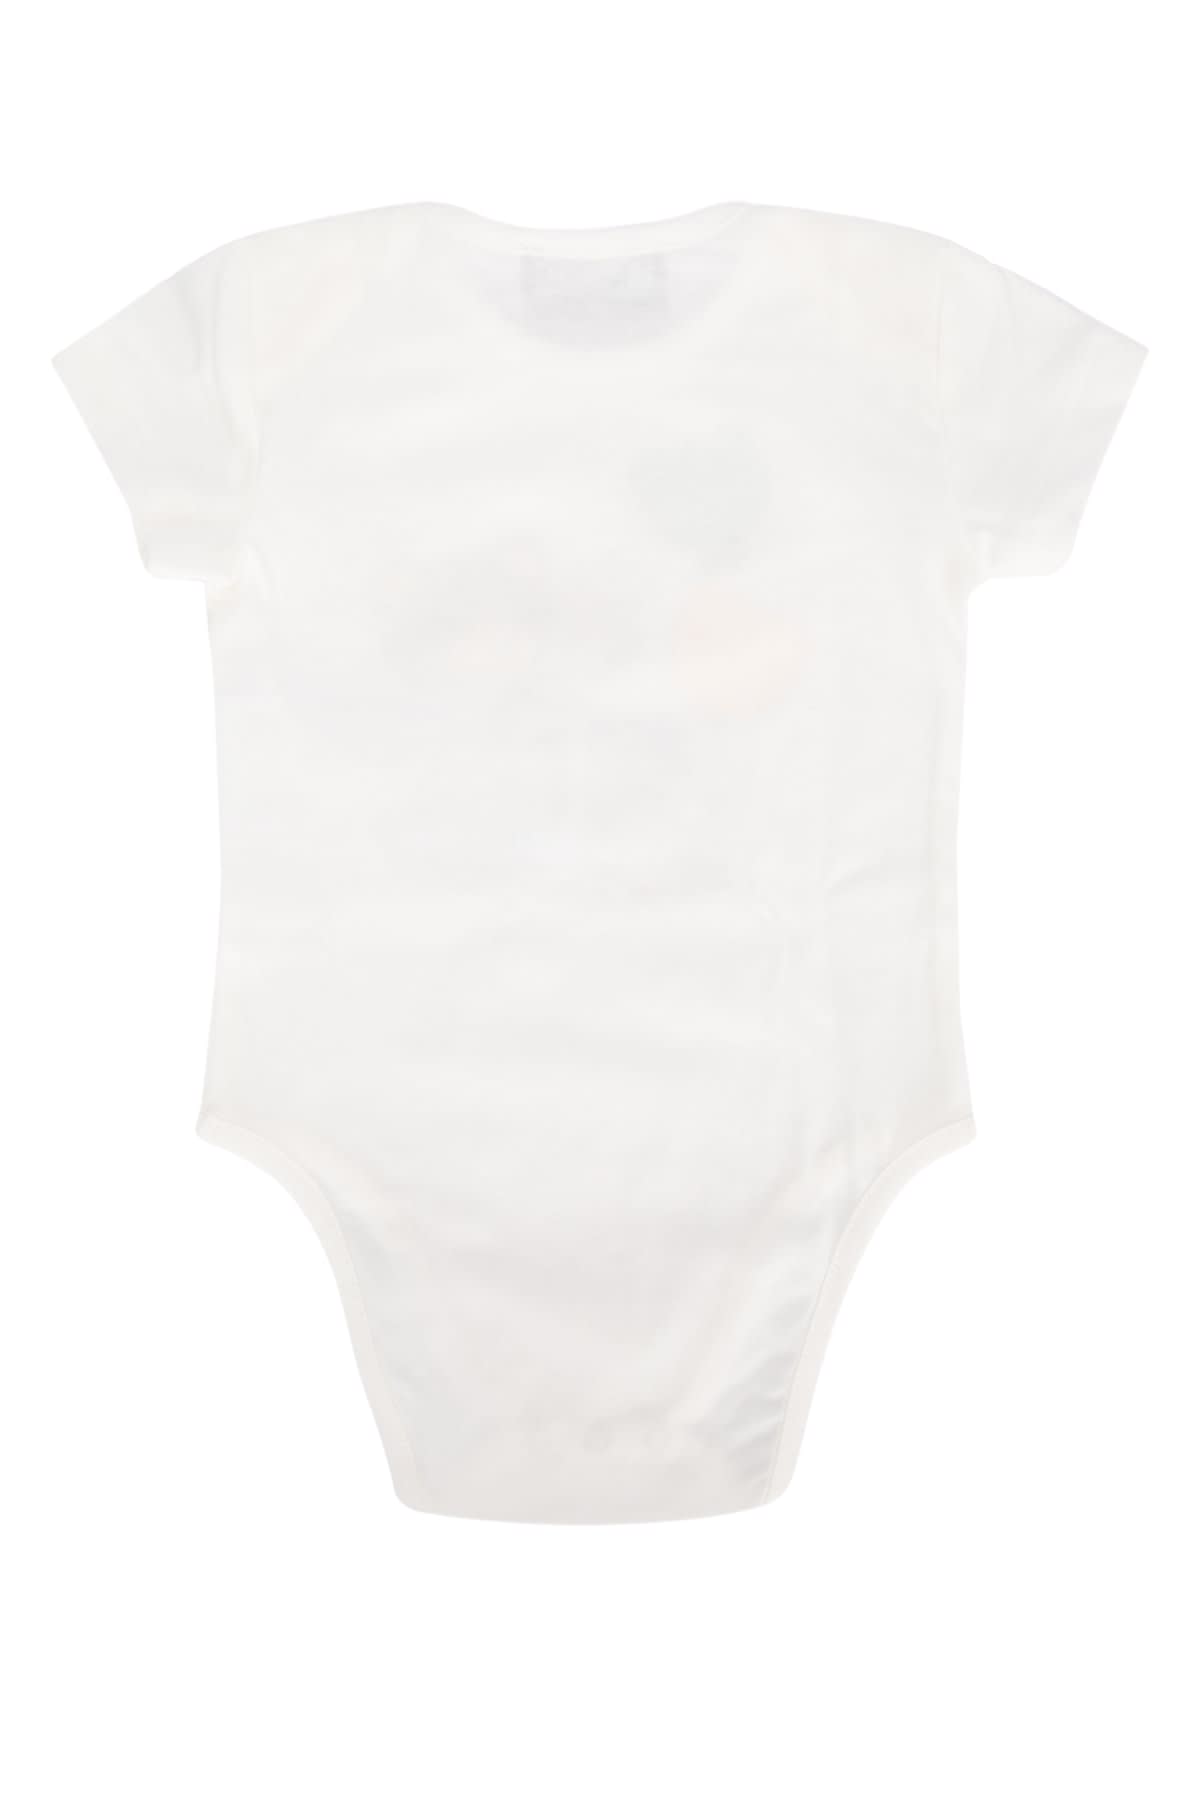 Moschino Babies' Intimo In Cloud